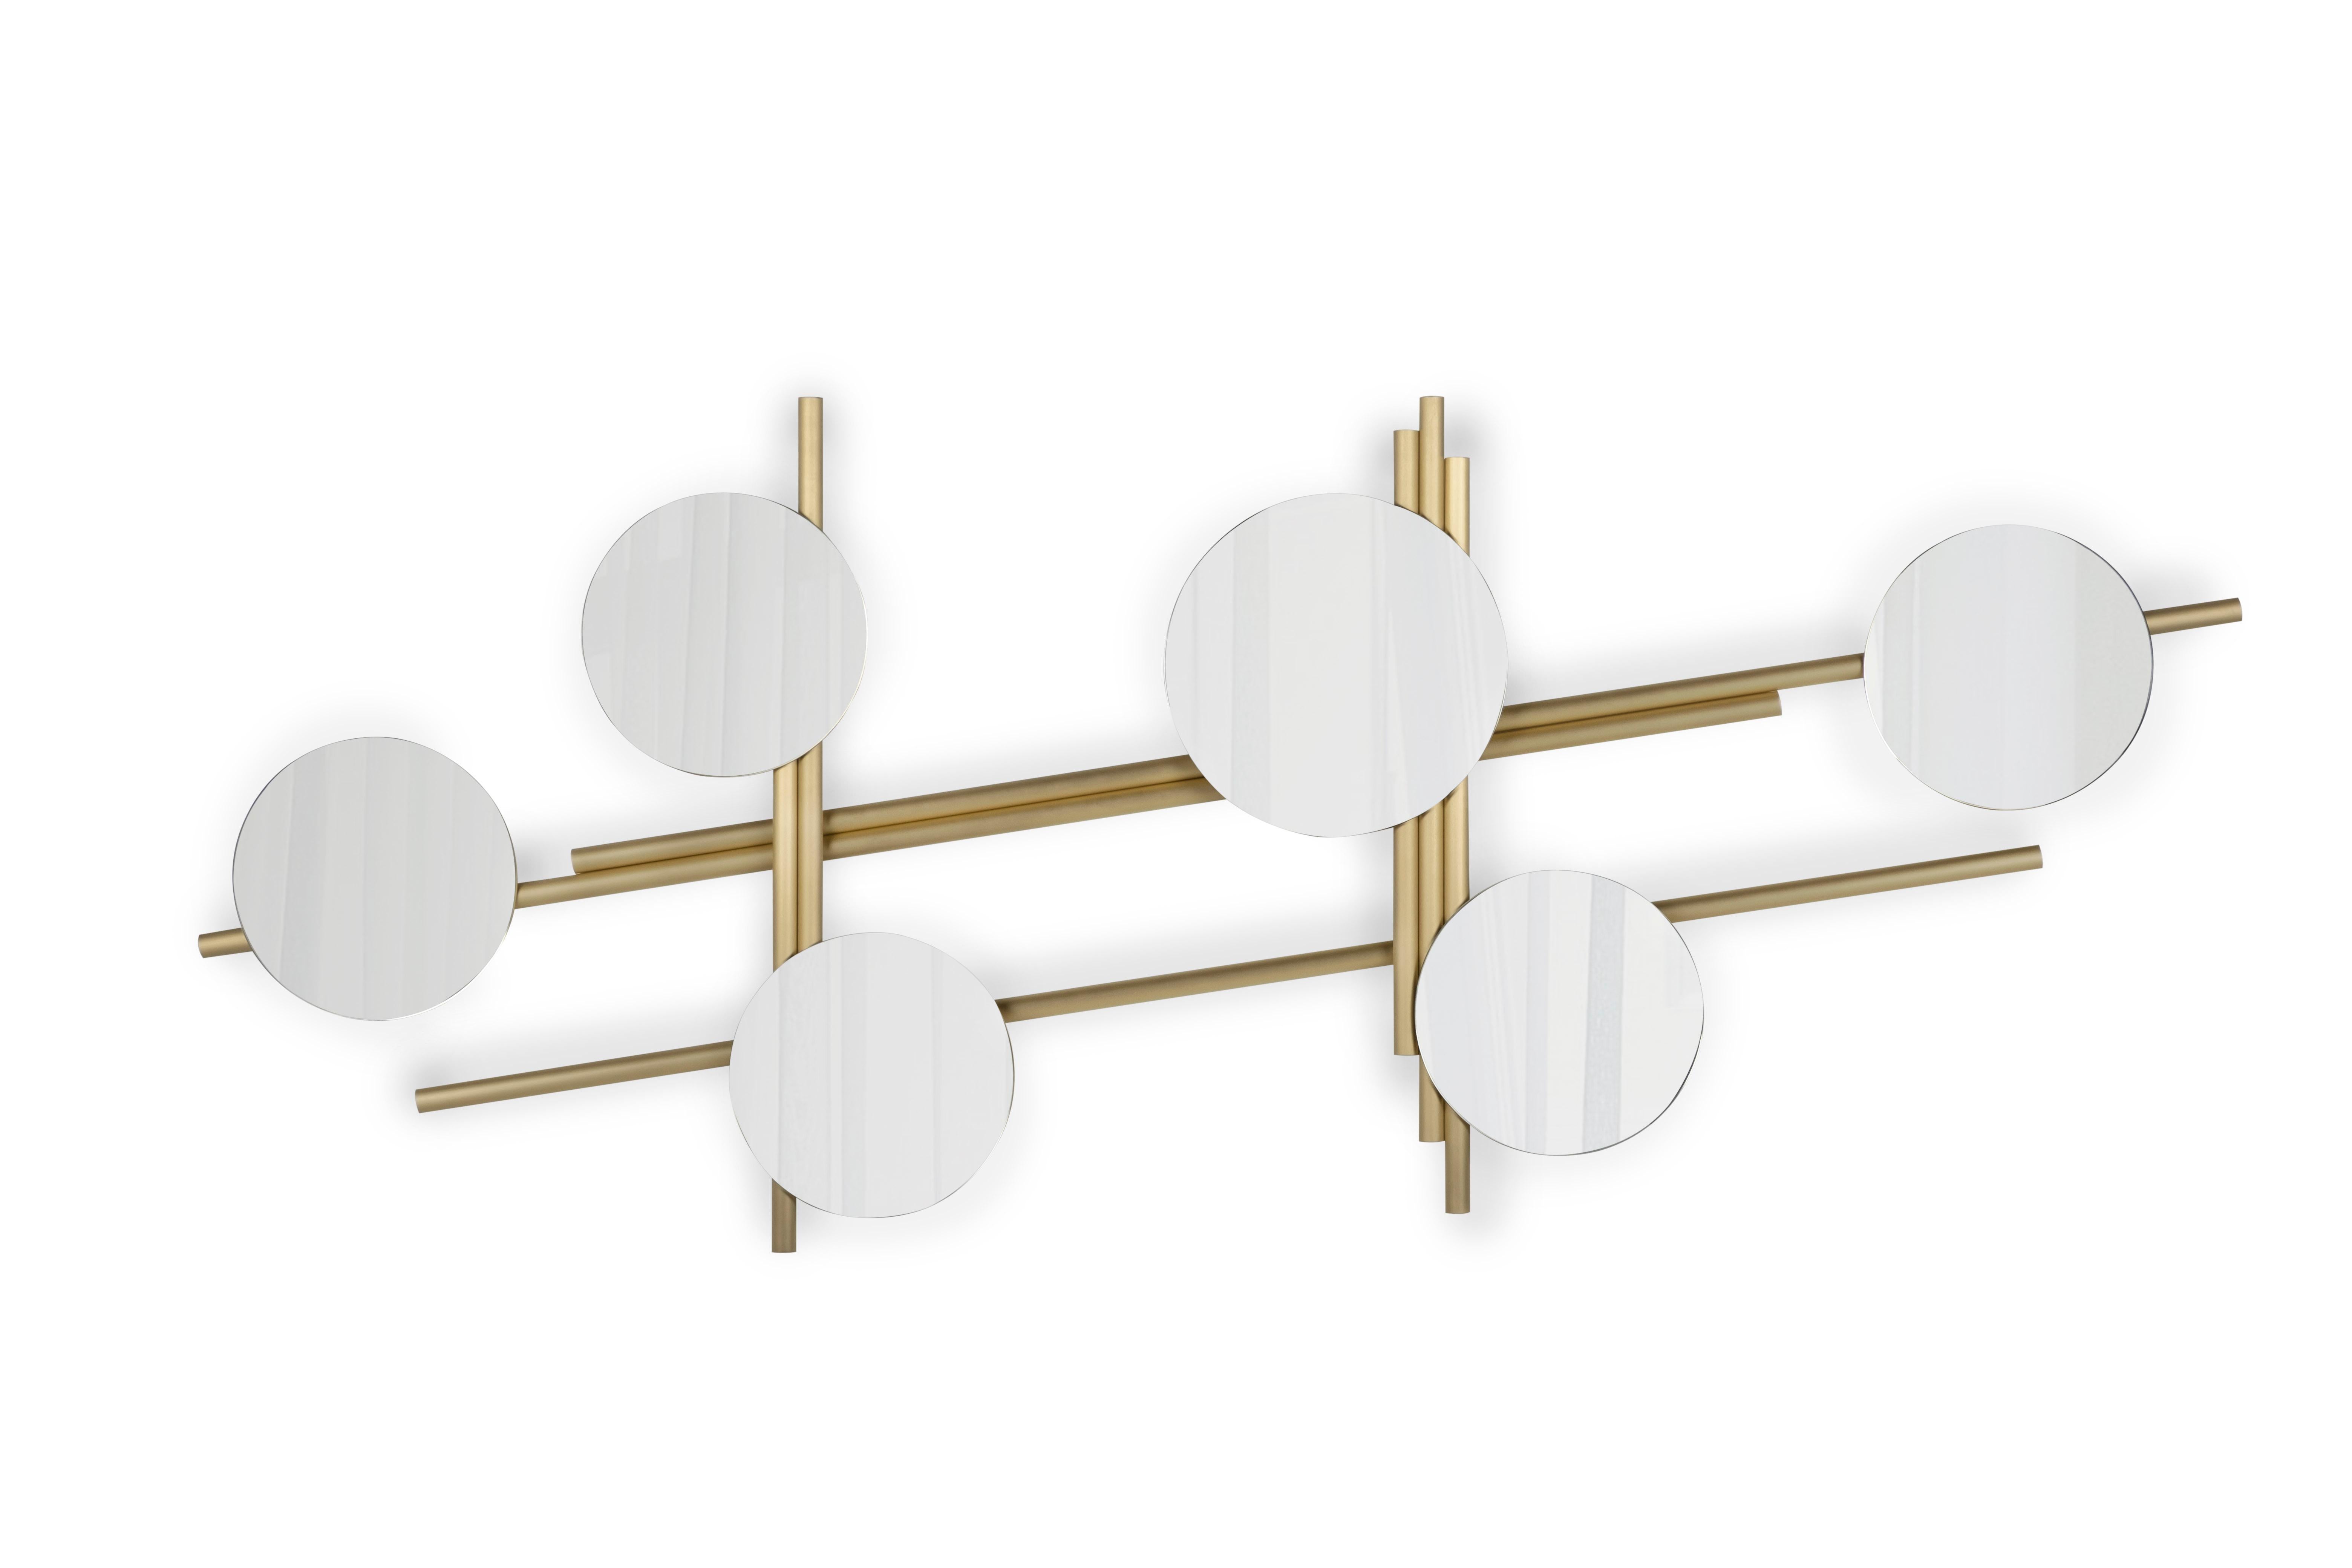 Flute Wall Mirror, Modern Collection, Handcrafted in Portugal - Europe by GF Modern.

The Flute wall mirror is a statement piece that brings harmony to any space, requiring no musical sheet for one to appreciate its design. Crafted in brushed brass,